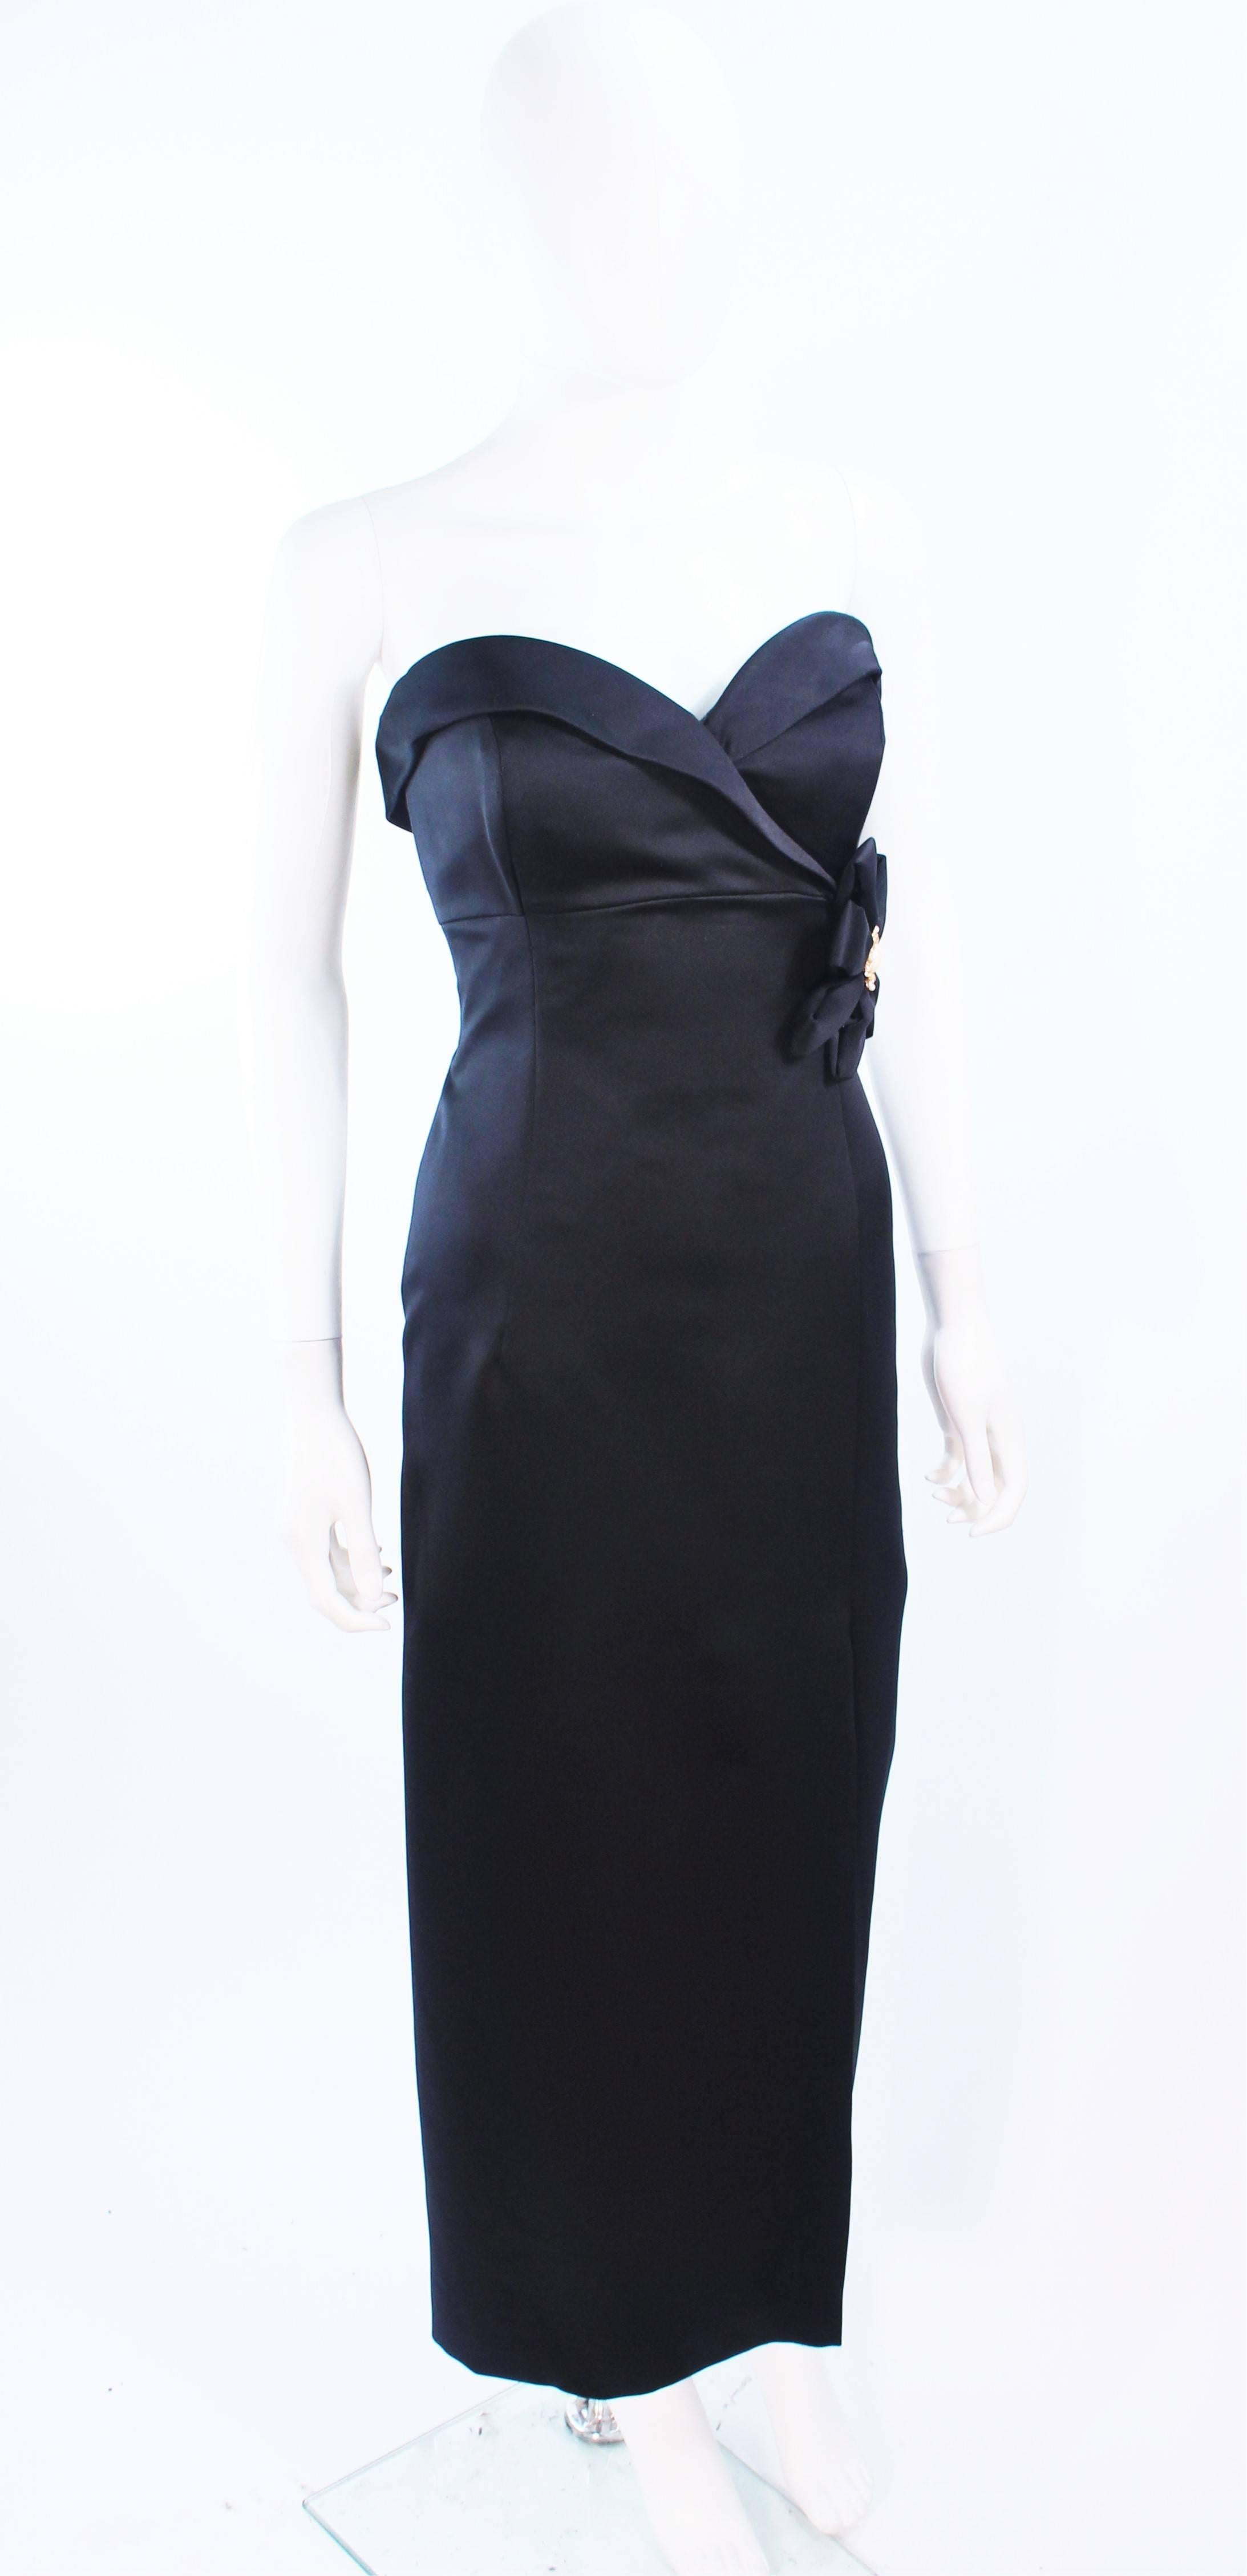 VICTOR COSTA Black Satin Gown with Side Bow Detail Size 6 8 For Sale 1